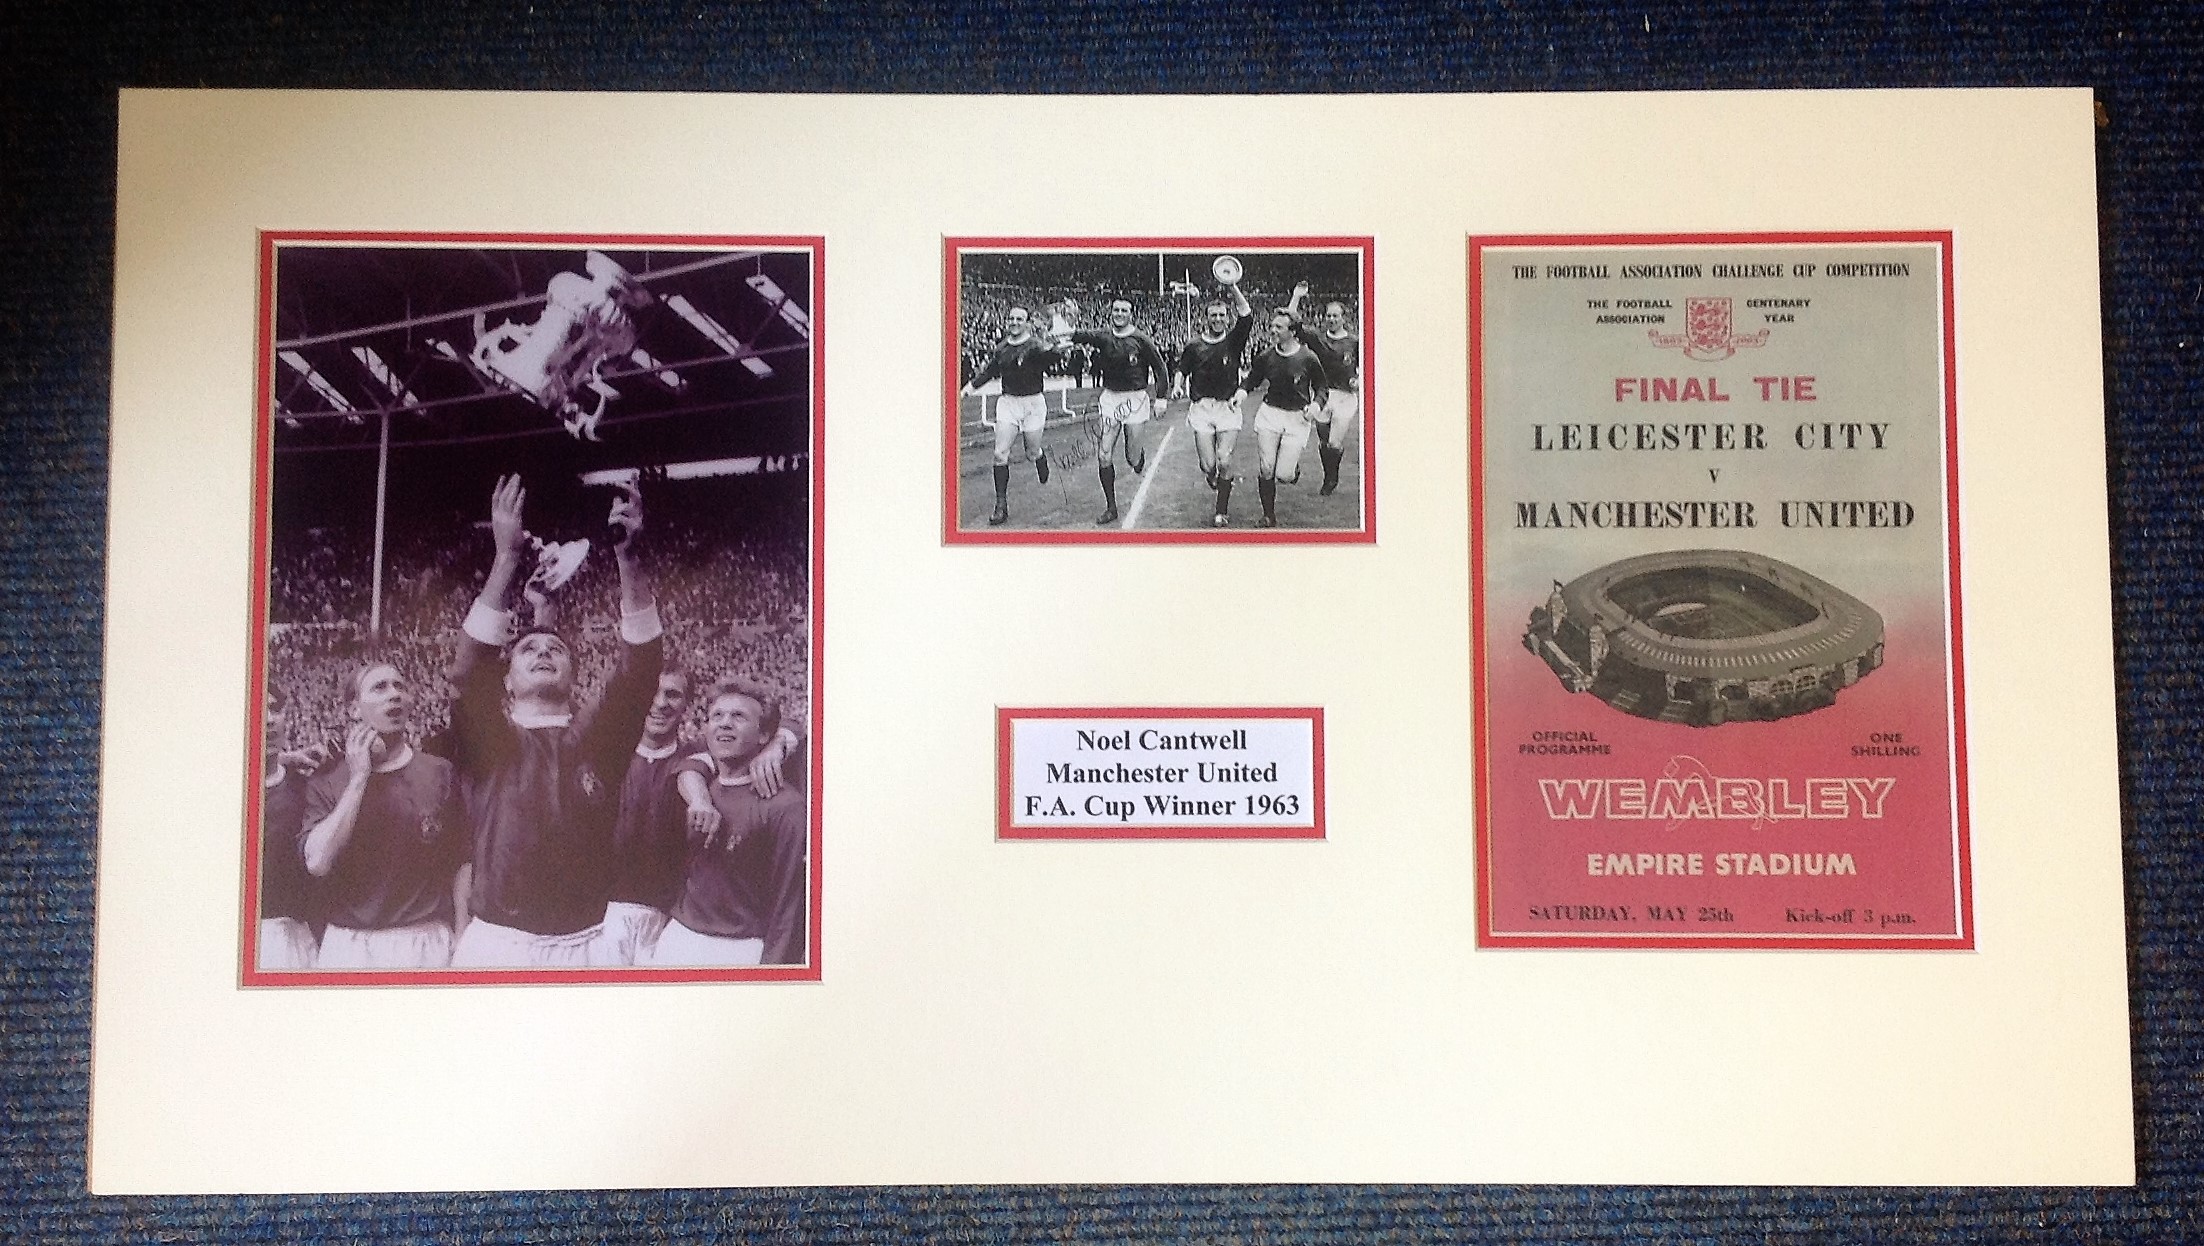 Noel Cantwell signed 6x4 b/w photo, mounted between b/w photo and copy of programme front cover.